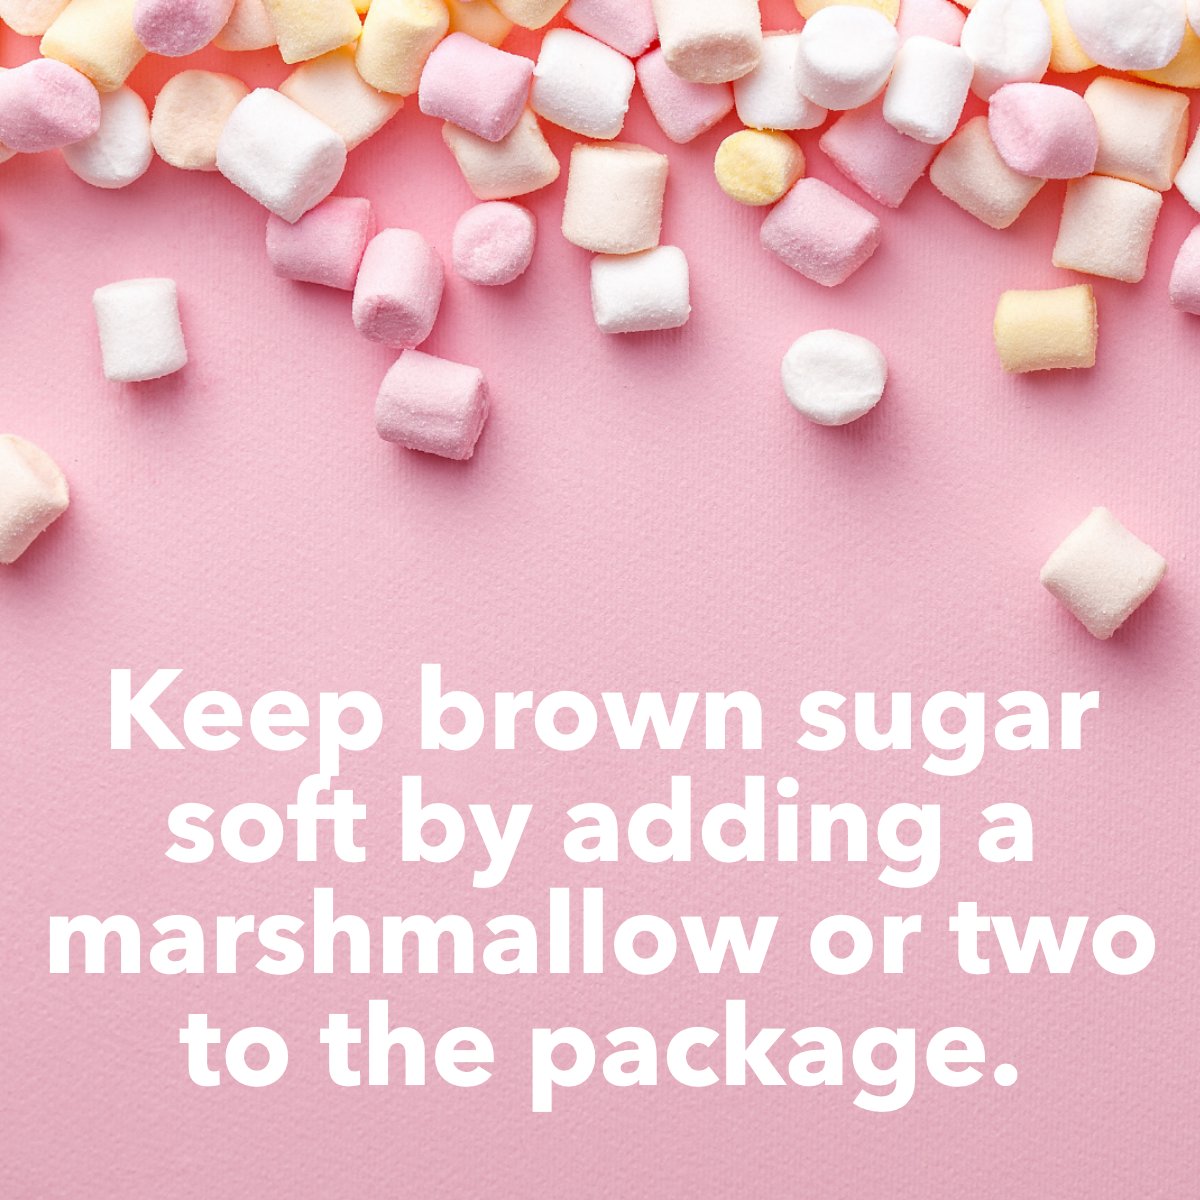 Did you know you can keep brown sugar soft by adding one or two marshmallows to the package? 

We love a sweet 🍬 #kitchenhack

If you have expert #bakingtips tips to share, let us know in the comments! 

#kitchenhack #cookingtips #marshmallow #marshmallows #pastel